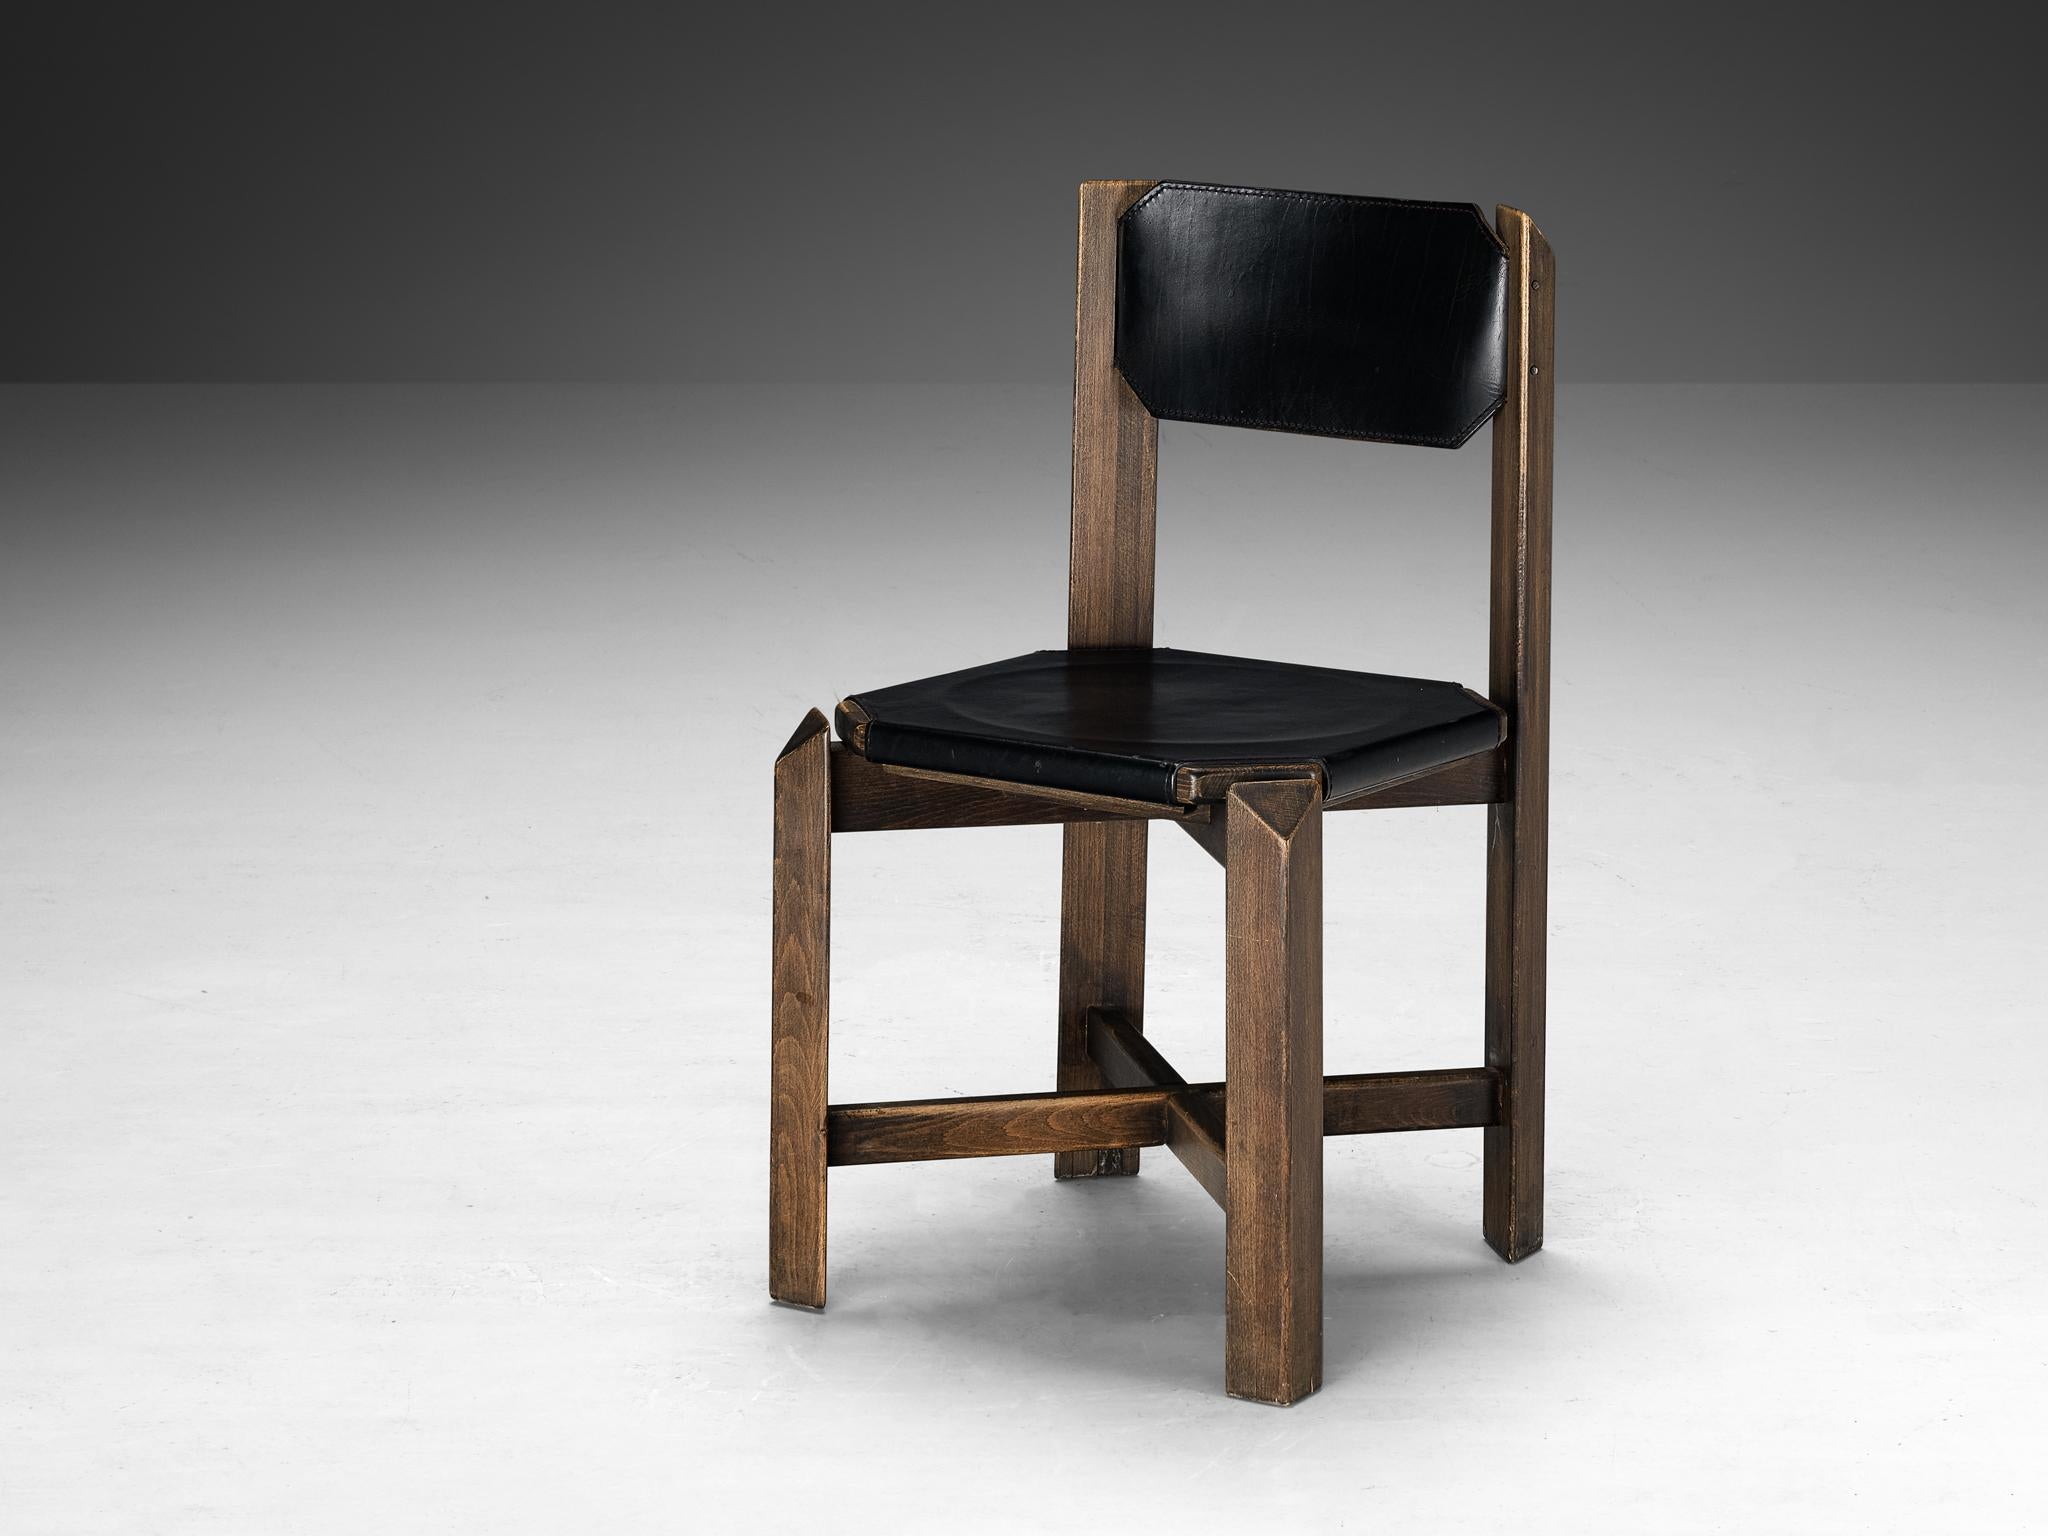 Dining chair, leather, beech, Europe, 1970s

This design shows a sturdy construction, featuring durable black leather upholstery complemented by a robust wooden framework. The architectural design showcases precise attention to detail, with linear